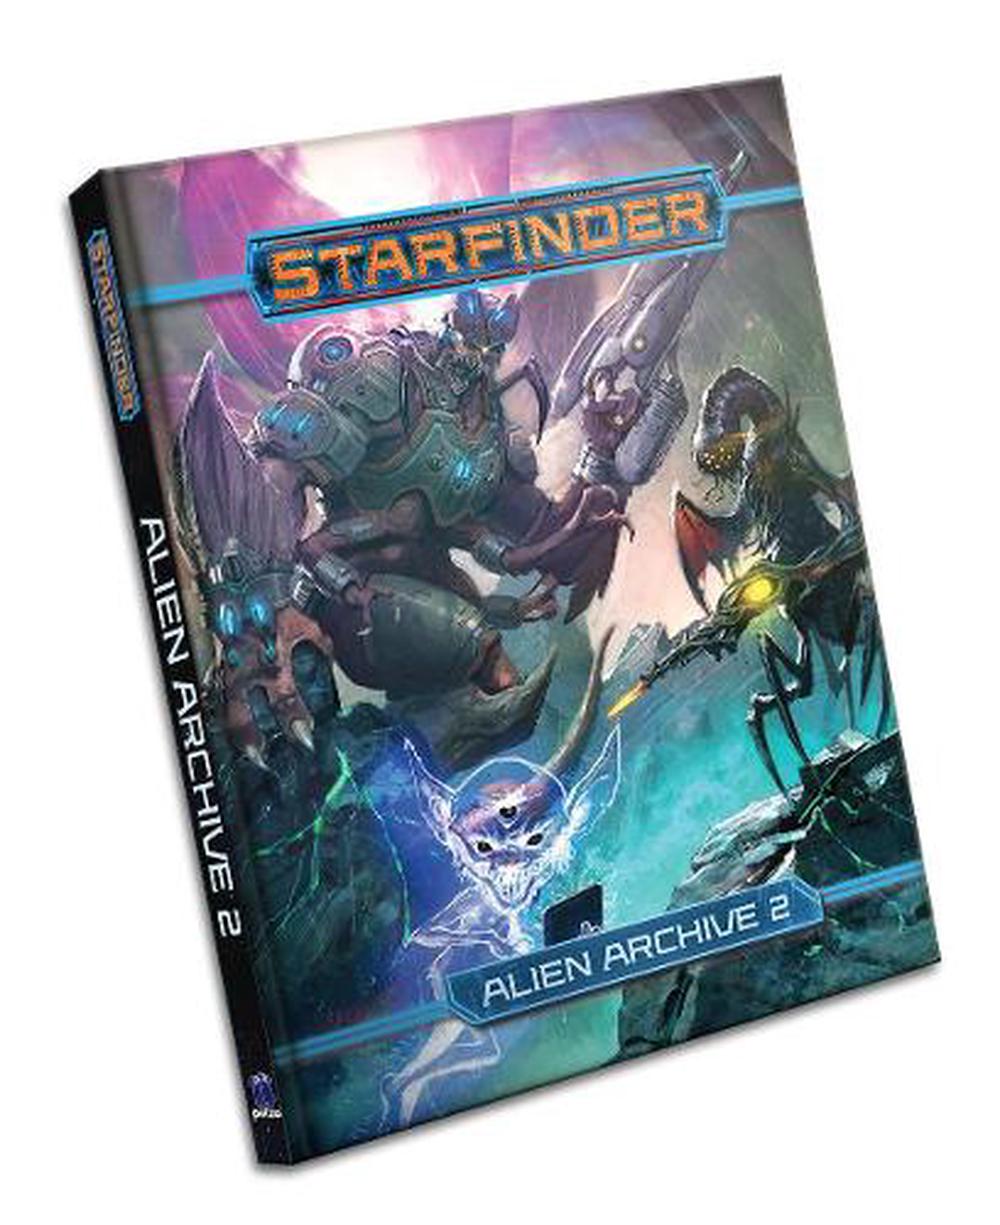 Starfinder Roleplaying Game: Alien Archive 2 by Paizo Staff (English ...